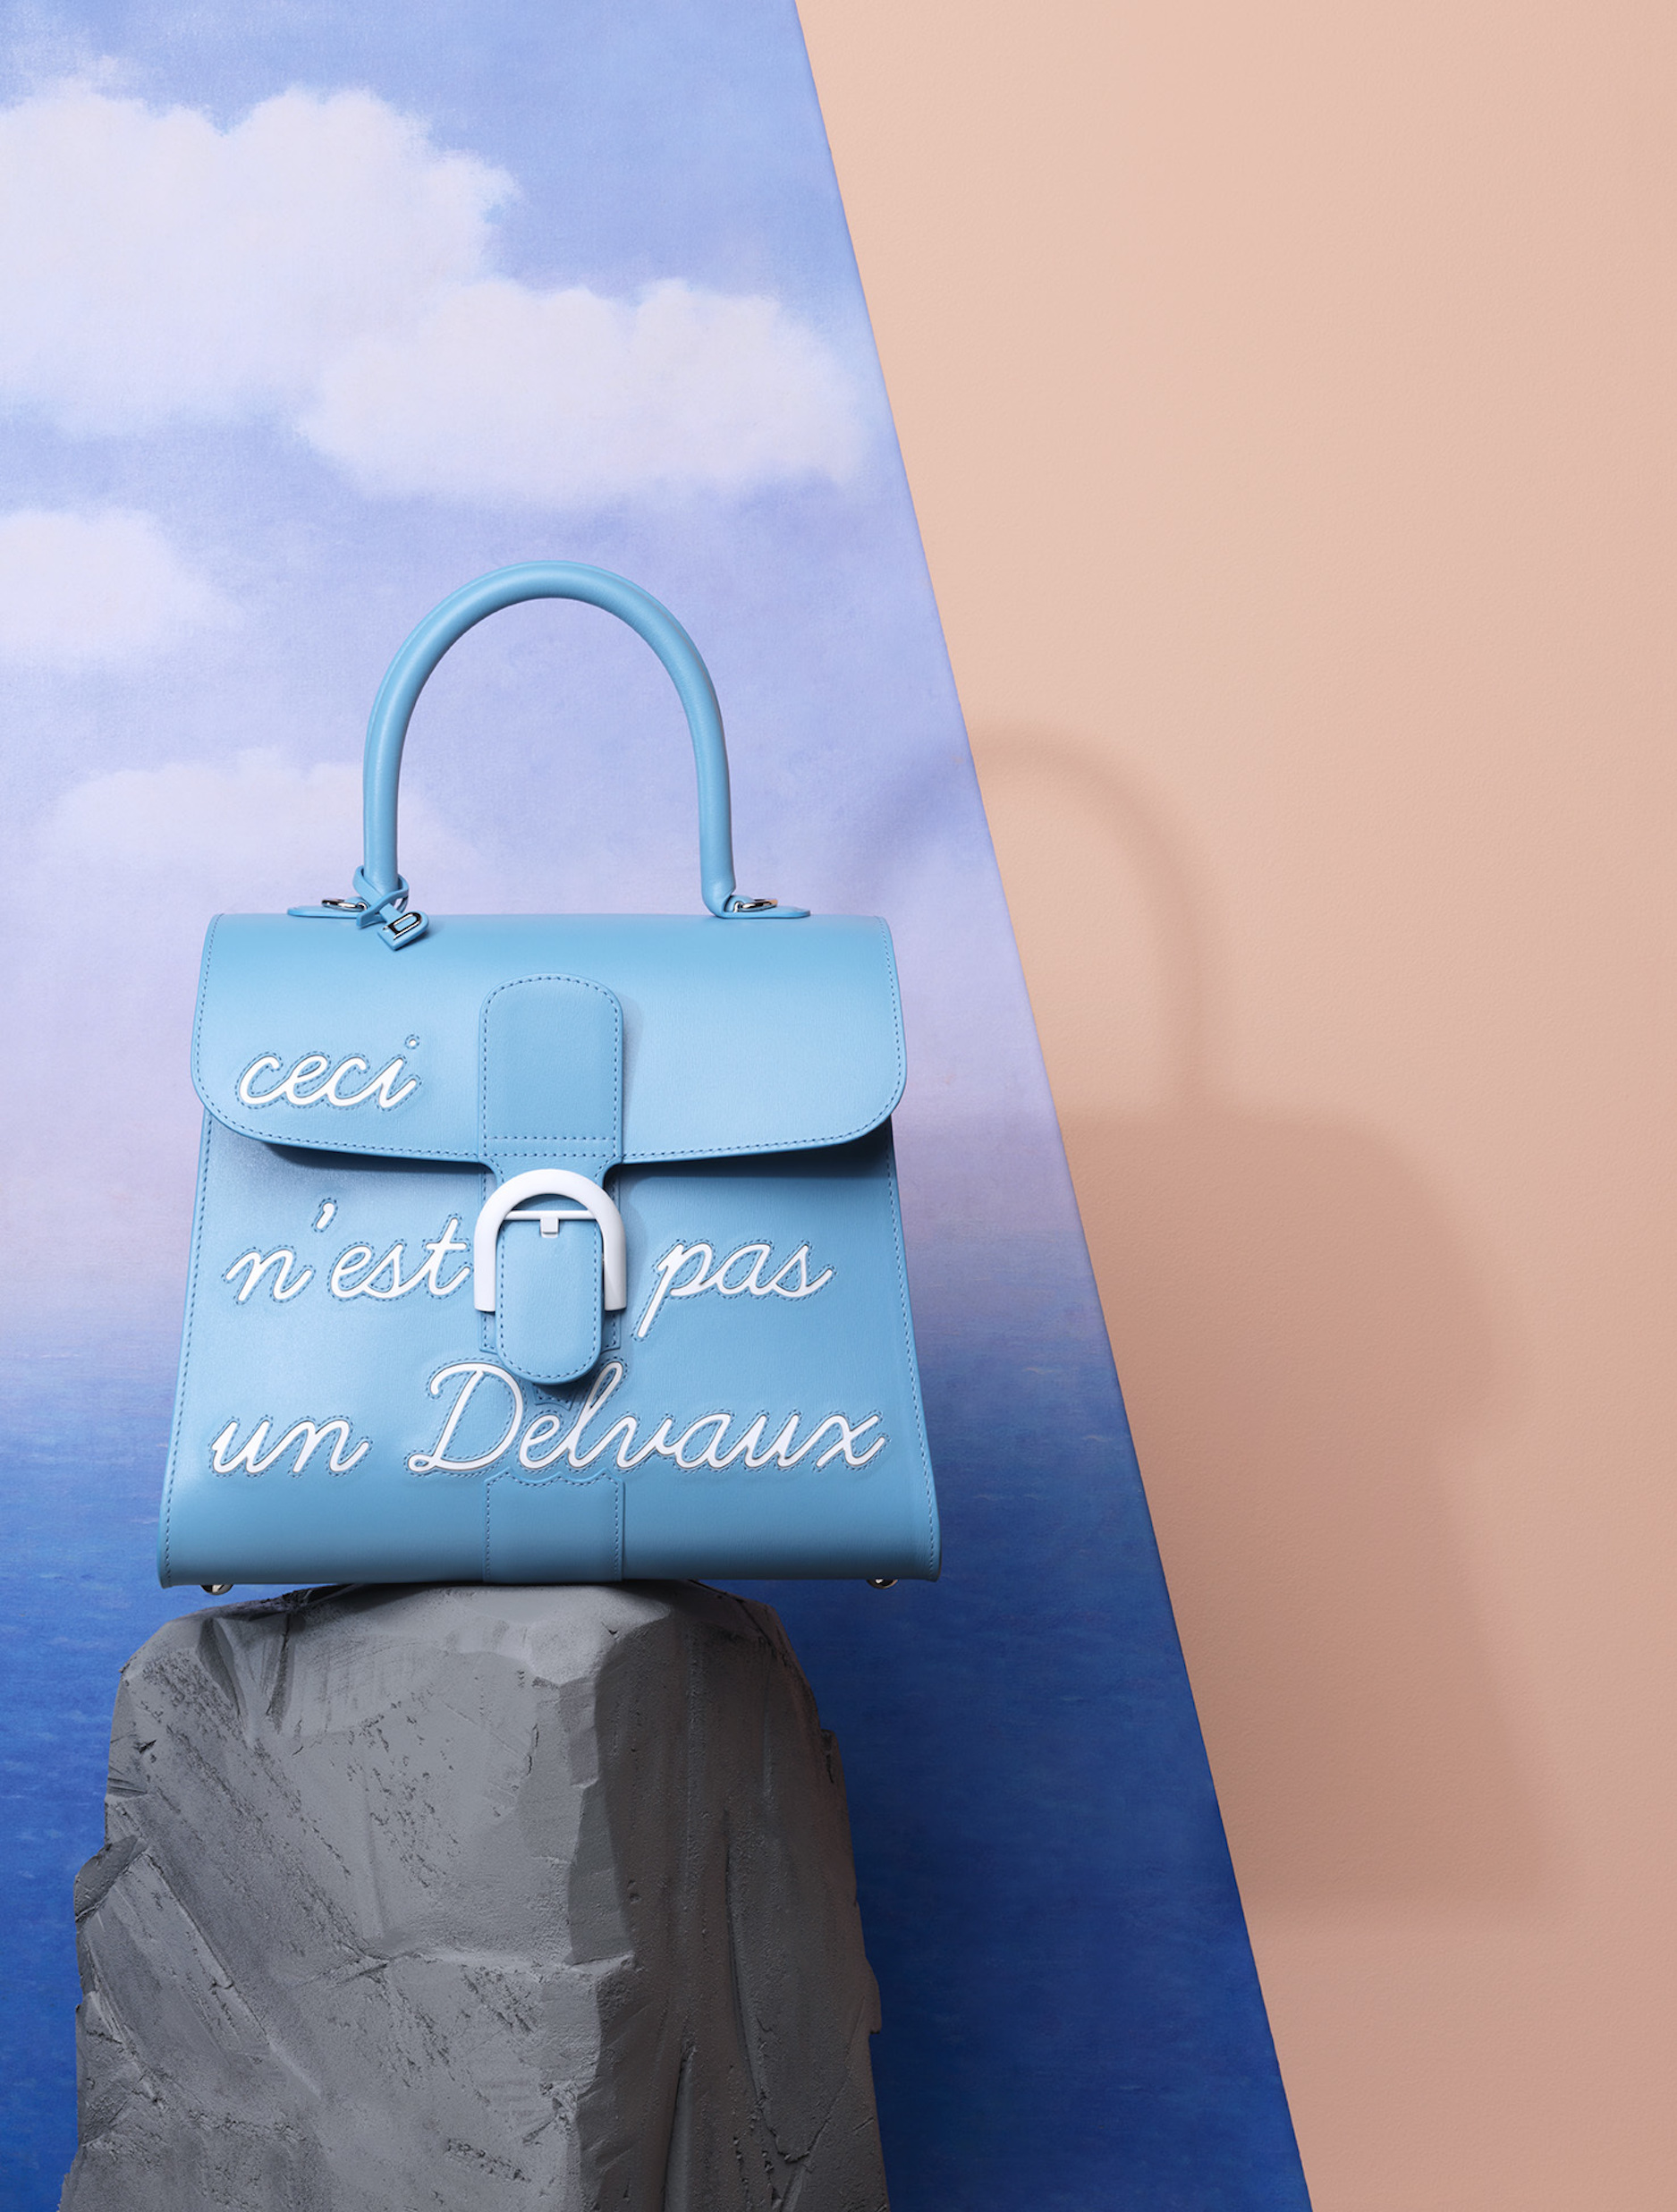 Delvaux makes its New York City debut on 5th Avenue